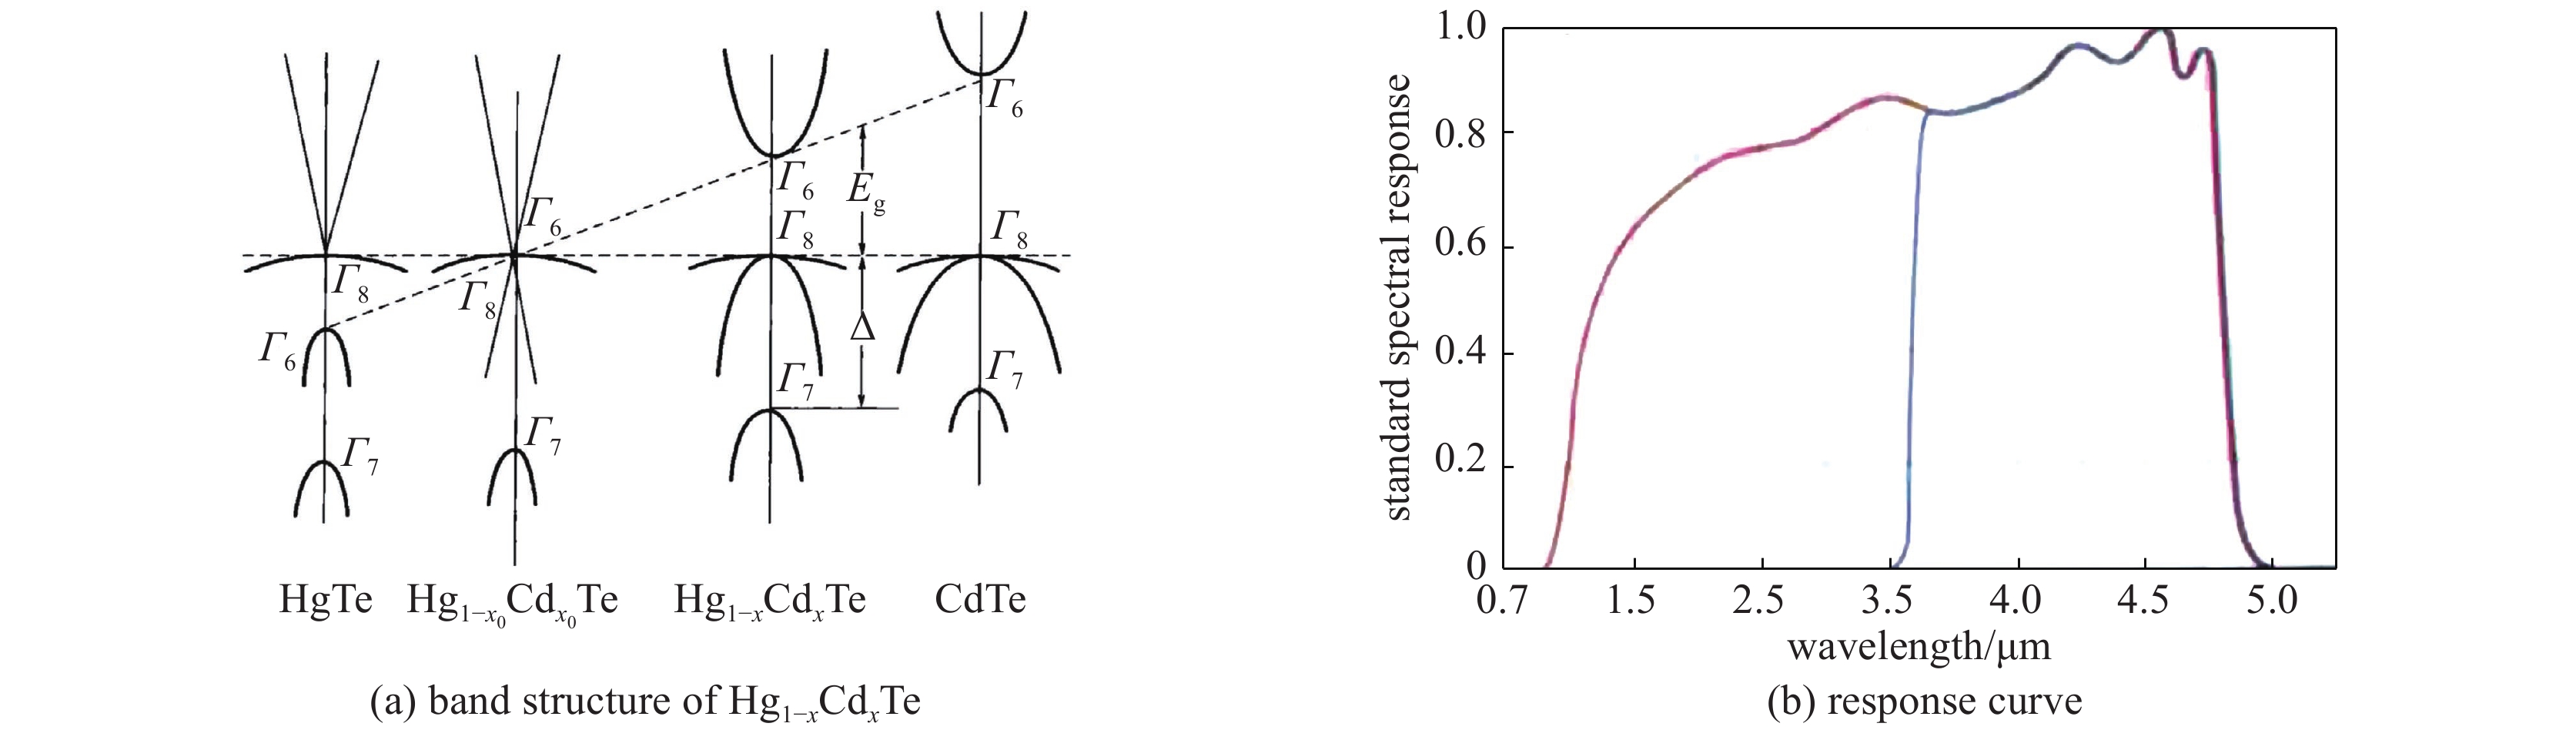 Band structure of Hg1-xCdxTe changes with composition and image of response curve of HgCdTe material (red curve)